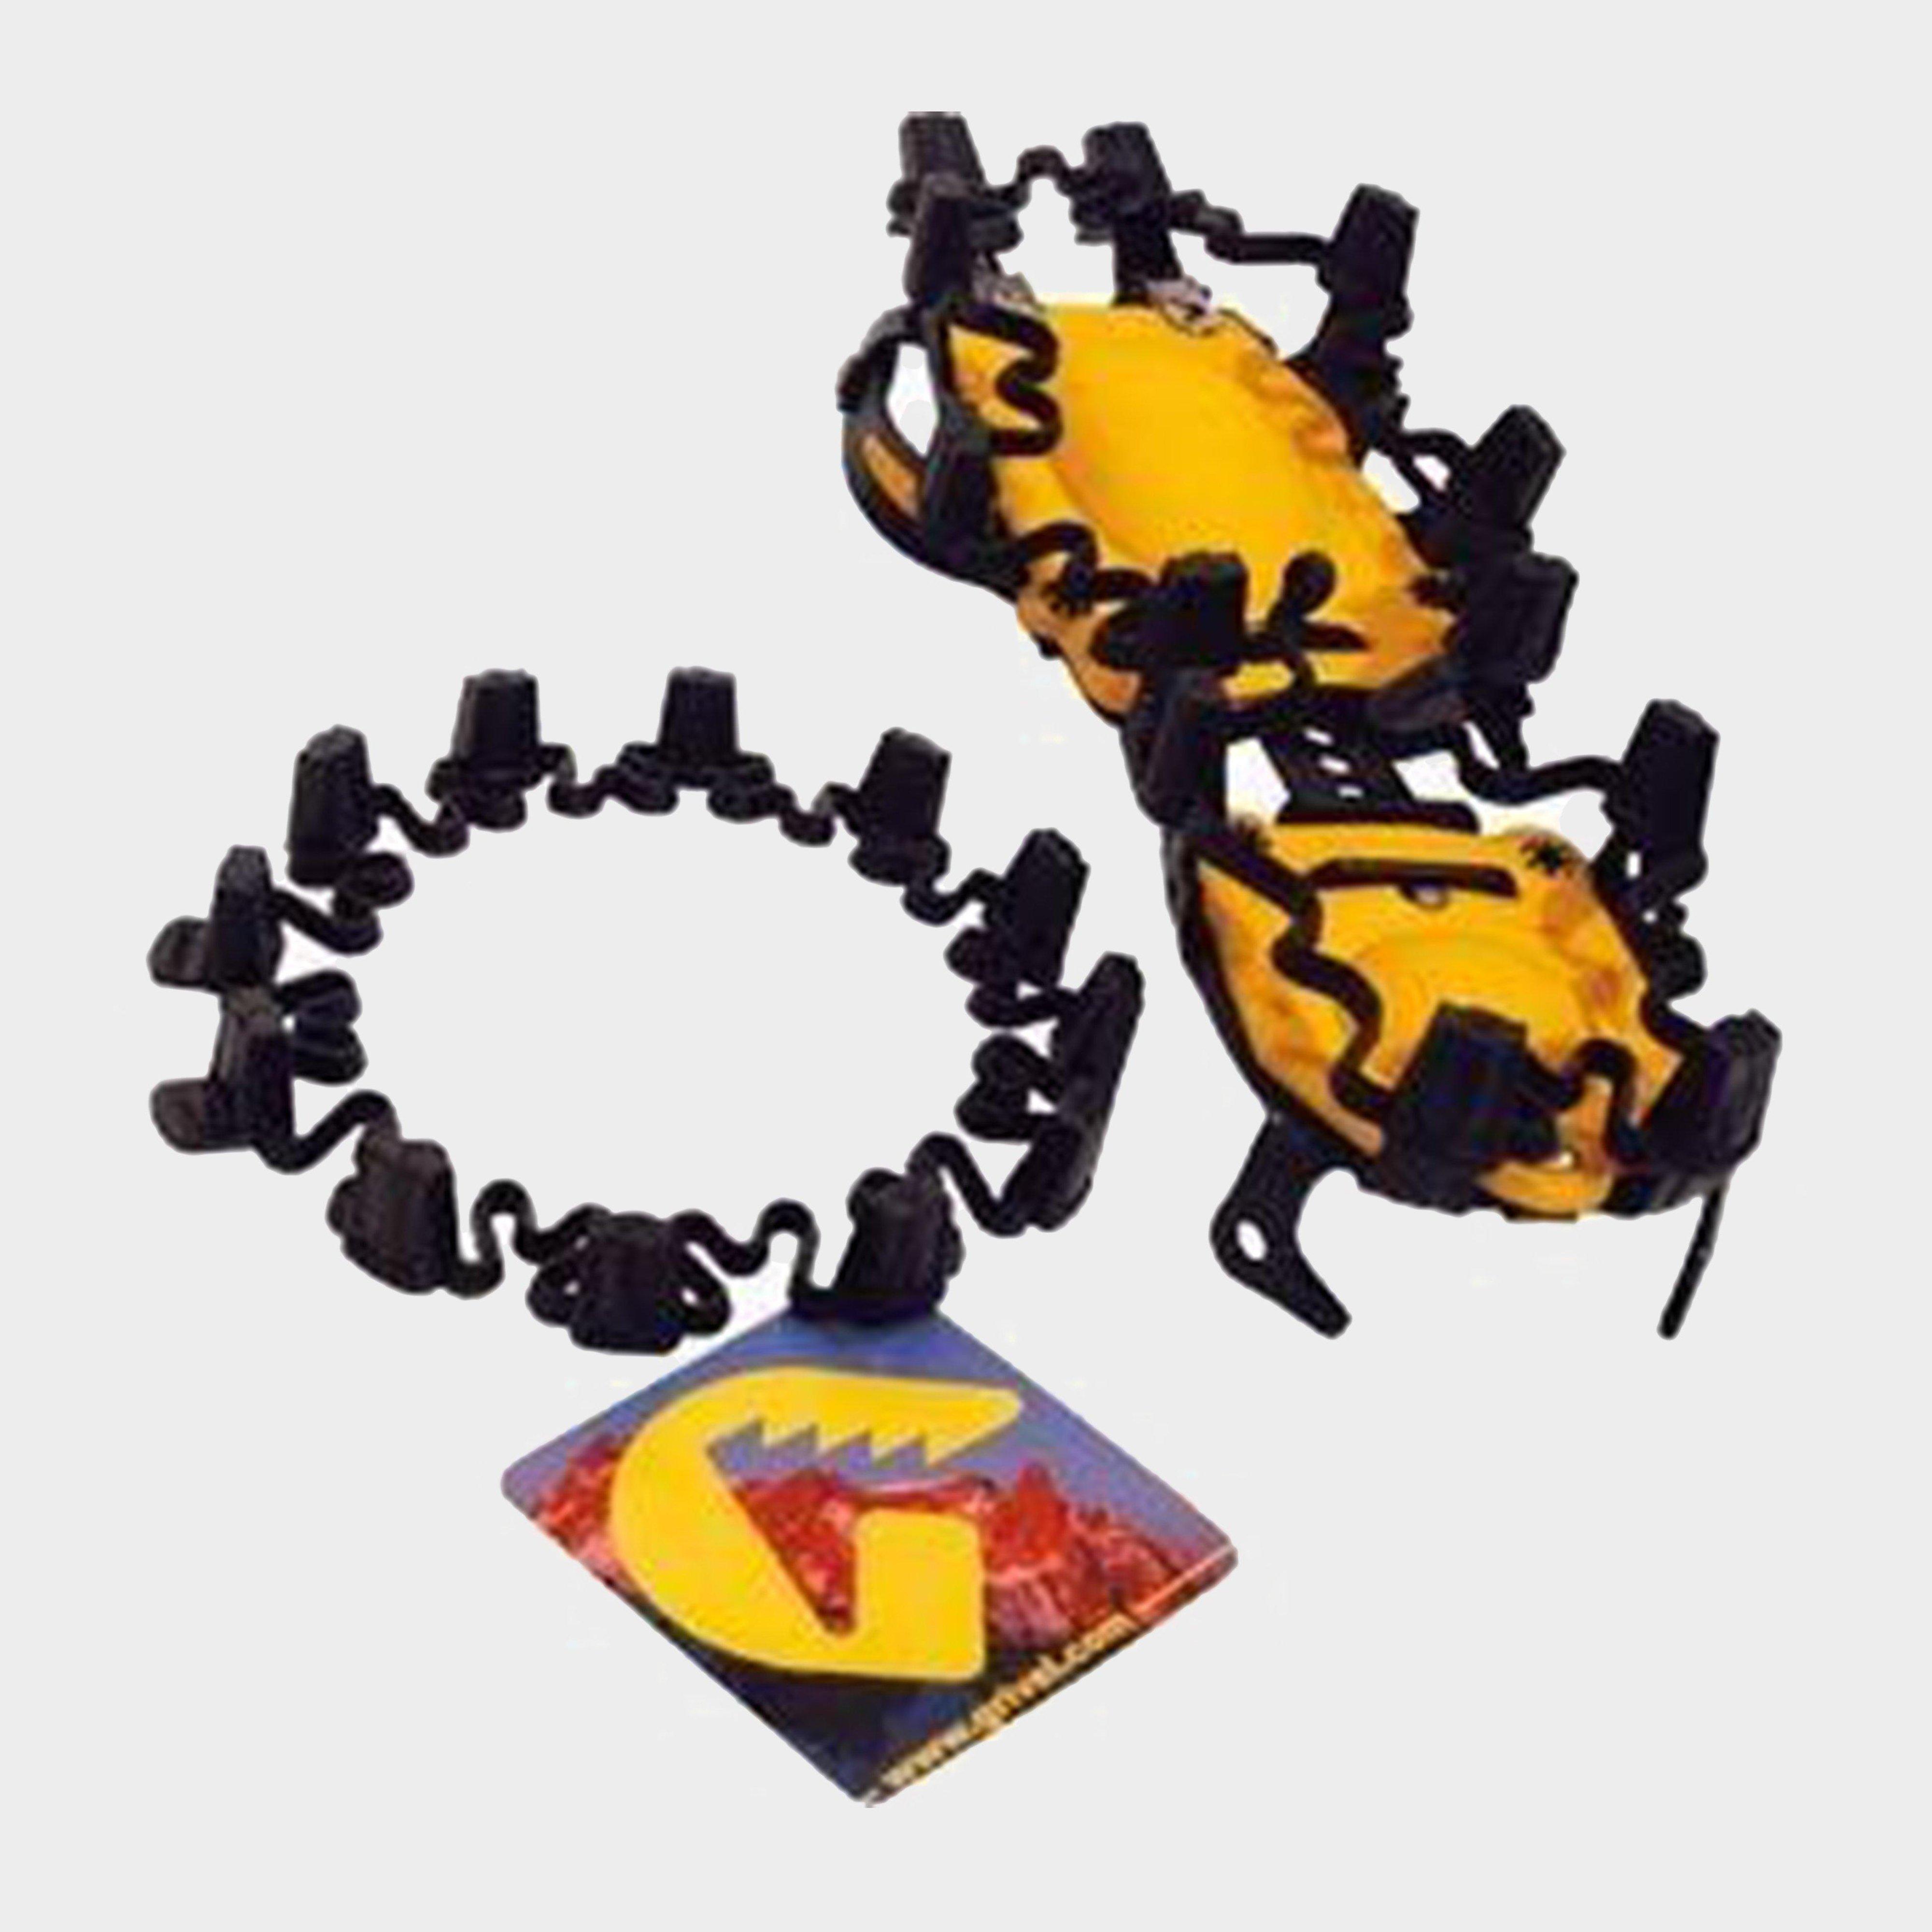 Grivel Crampon Crowns  Yellow